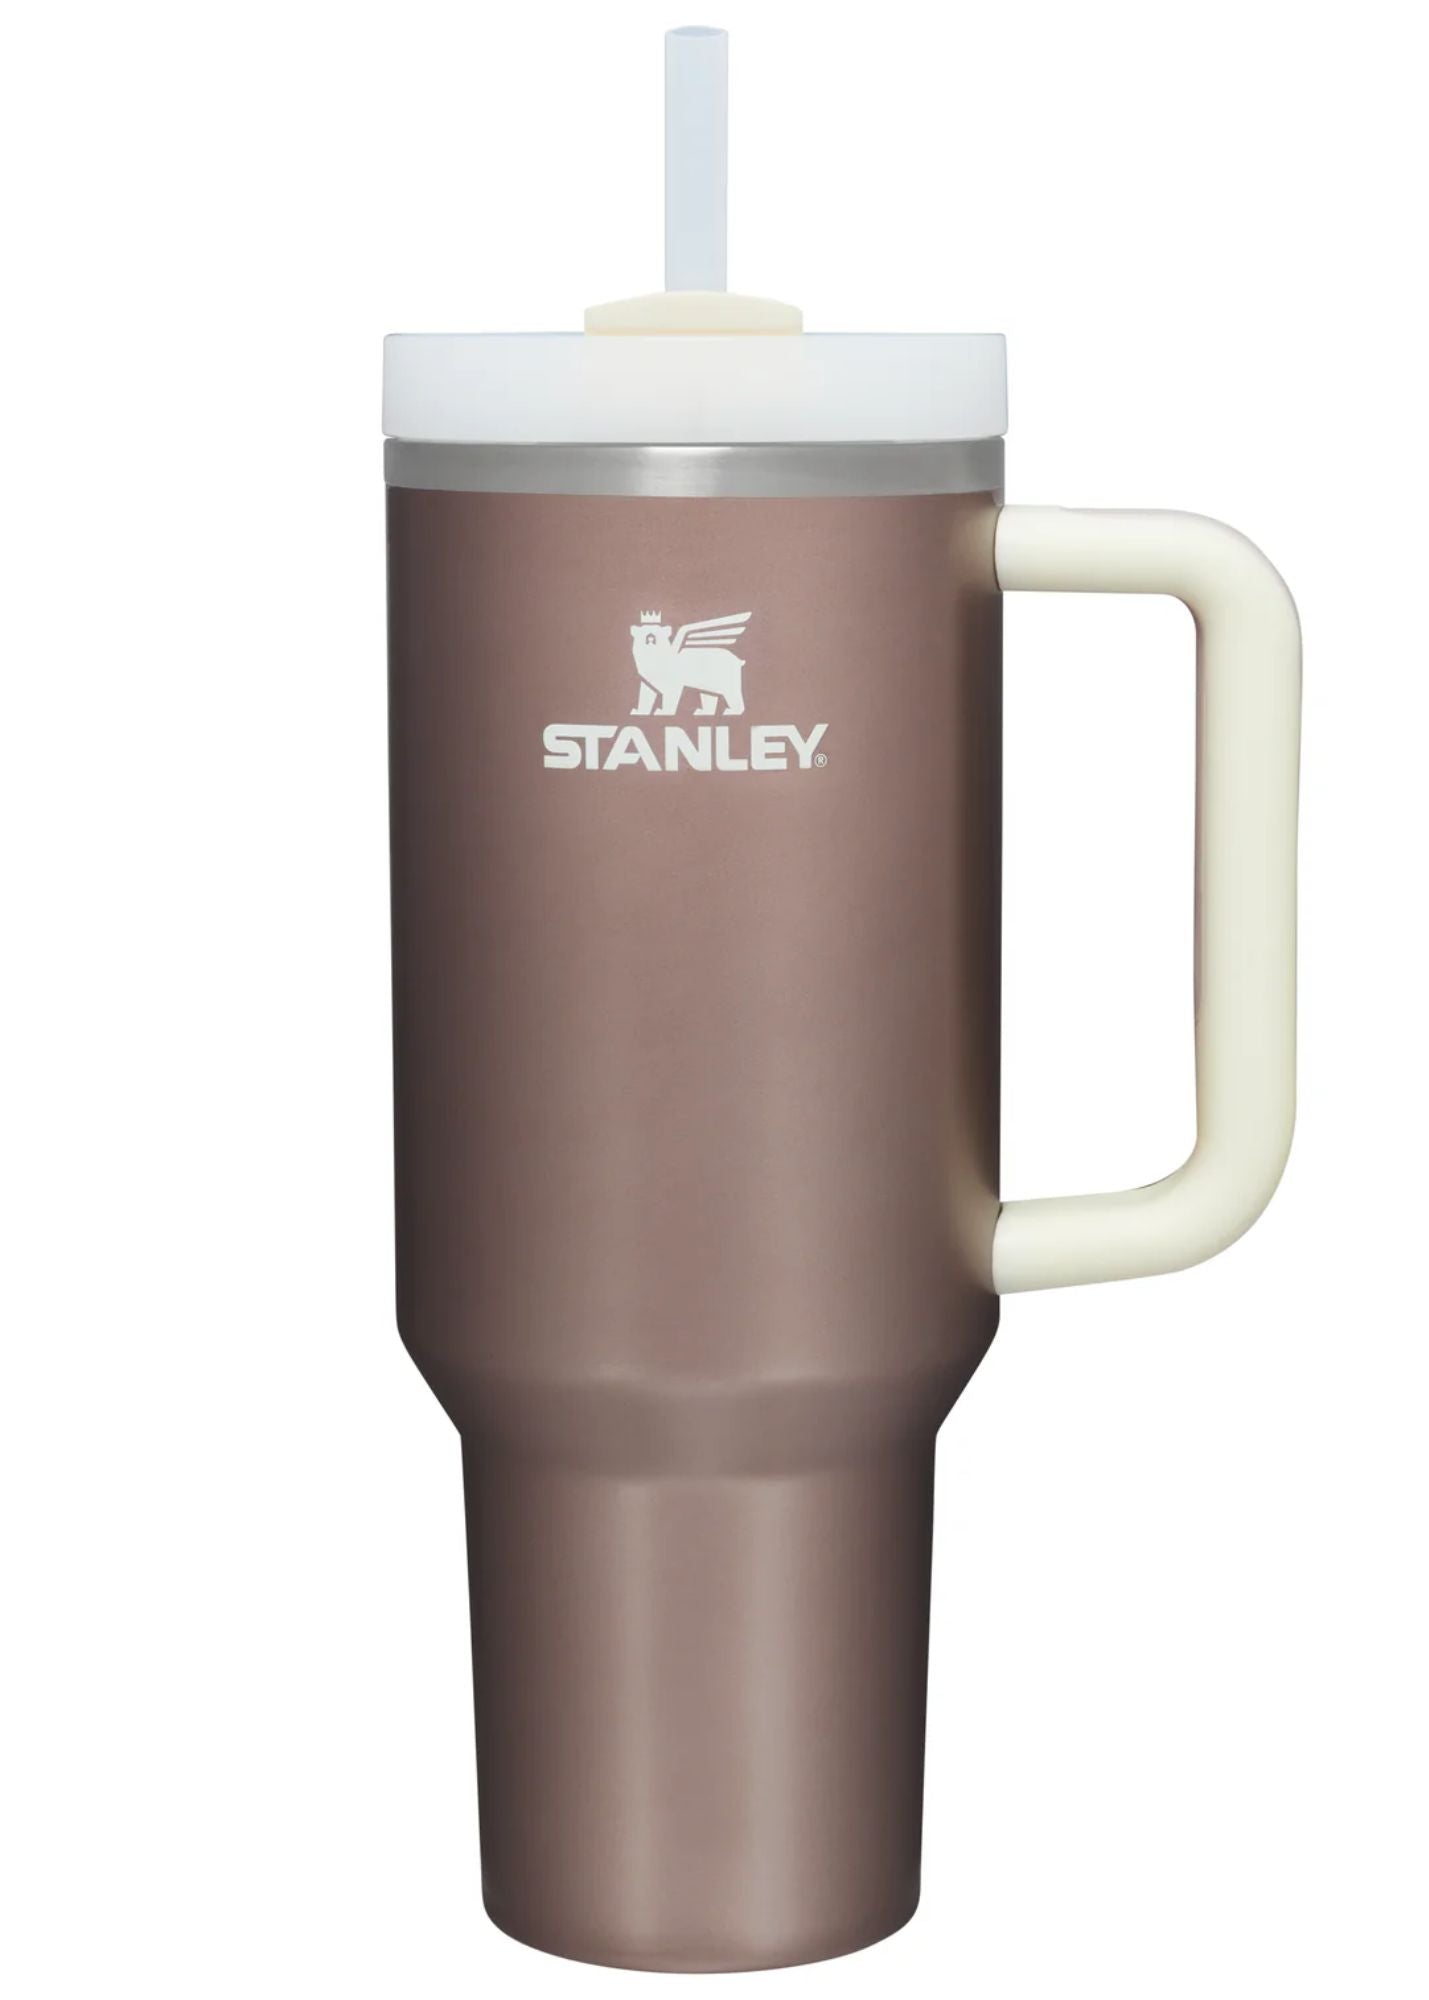 STANLEY Quencher H2.0 FlowState Tumbler 40oz (Peach): Tumblers  & Water Glasses